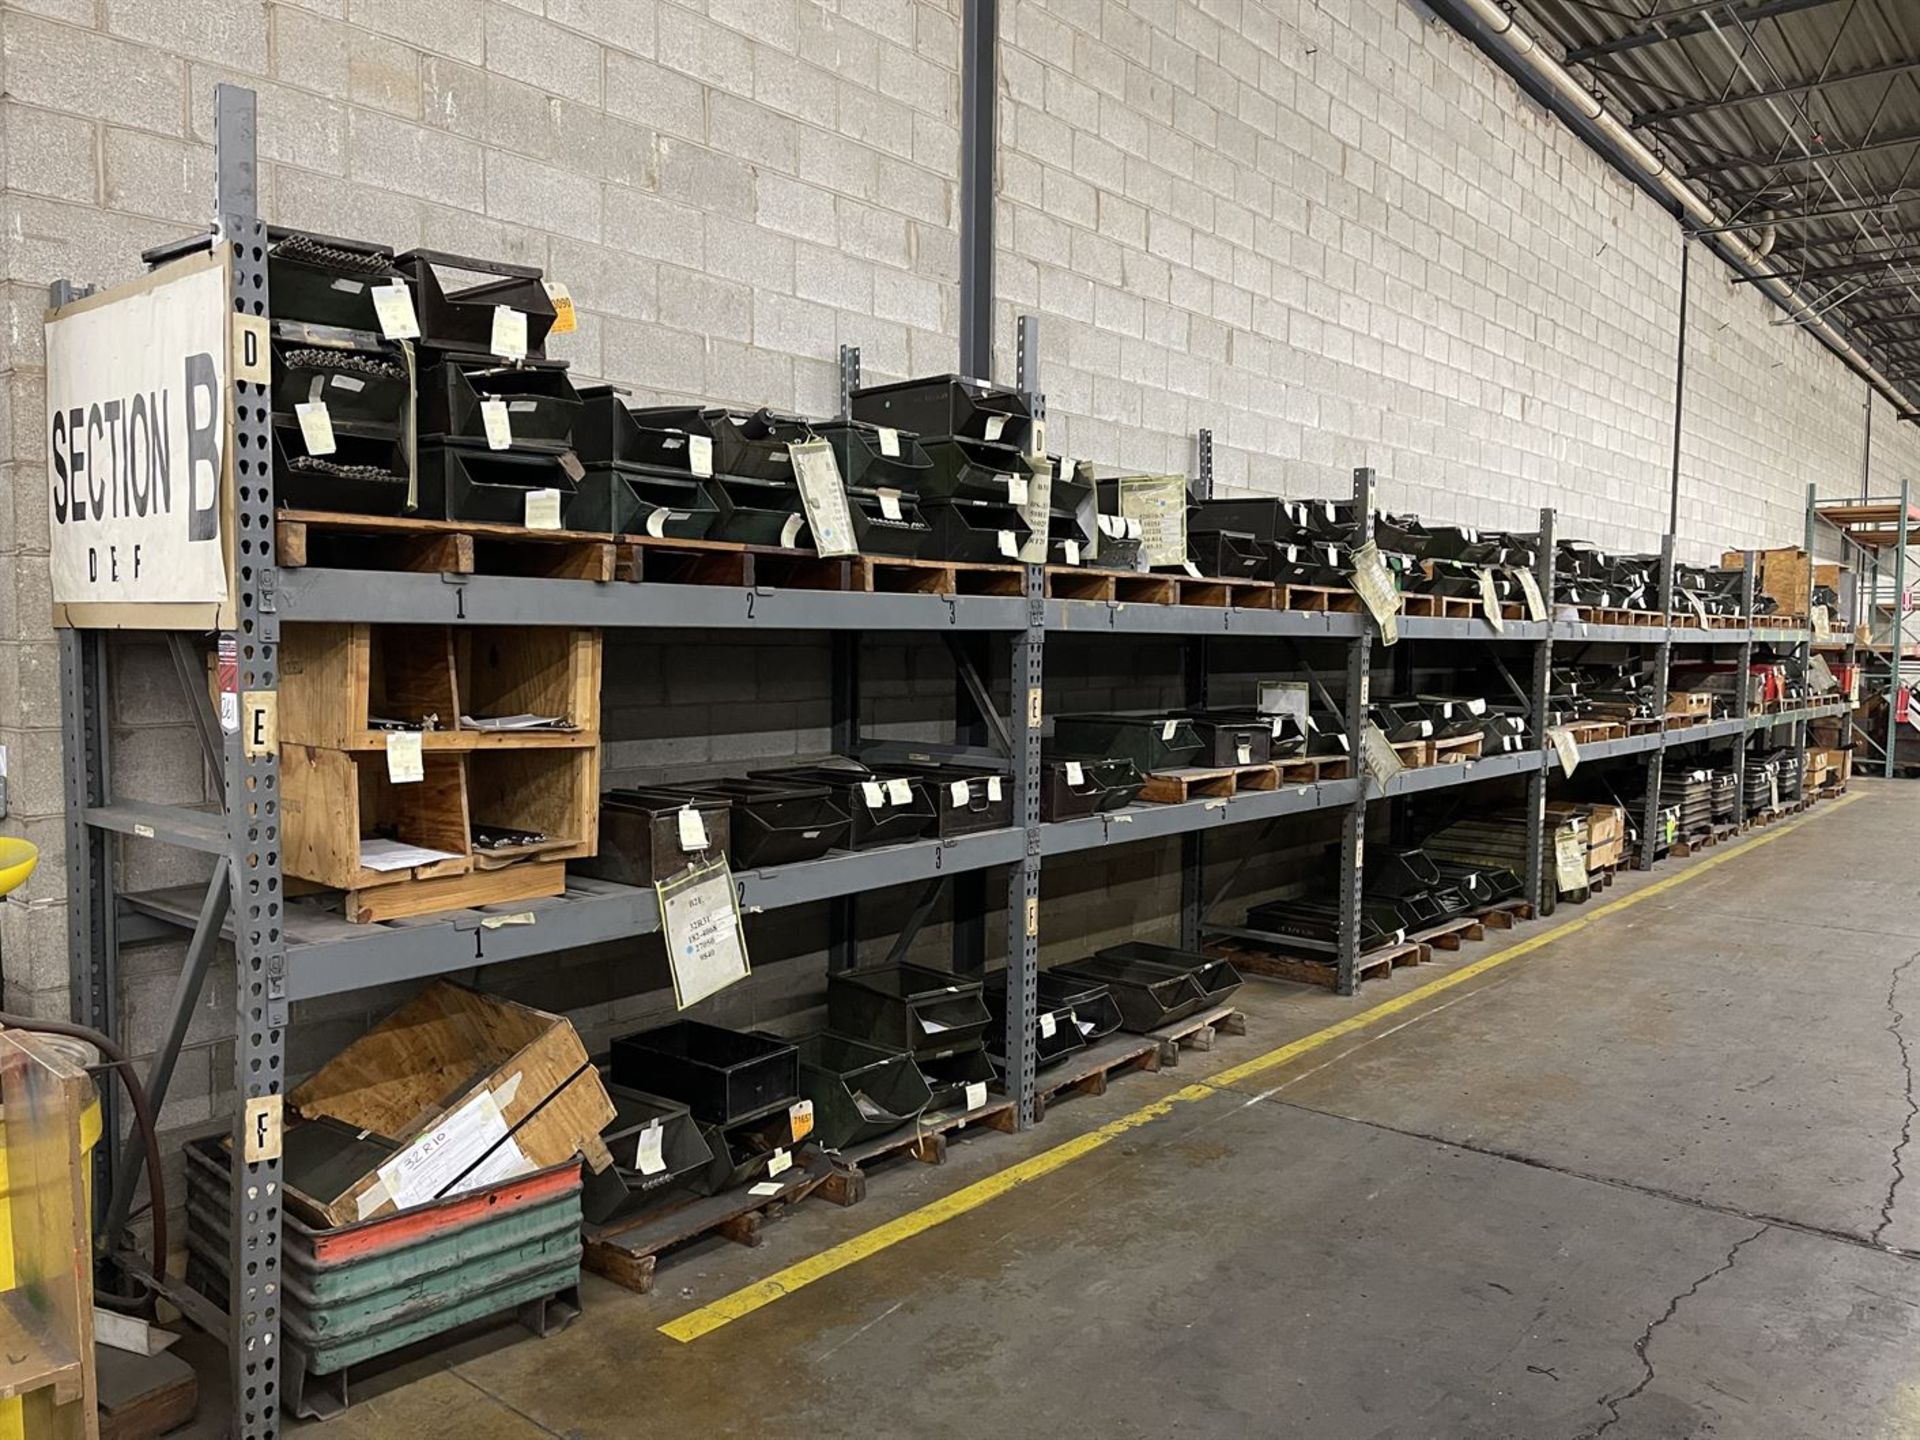 Lot of (7) Sections of Pallet Racking w/Contents Including Large Assortment of Steel Totes and